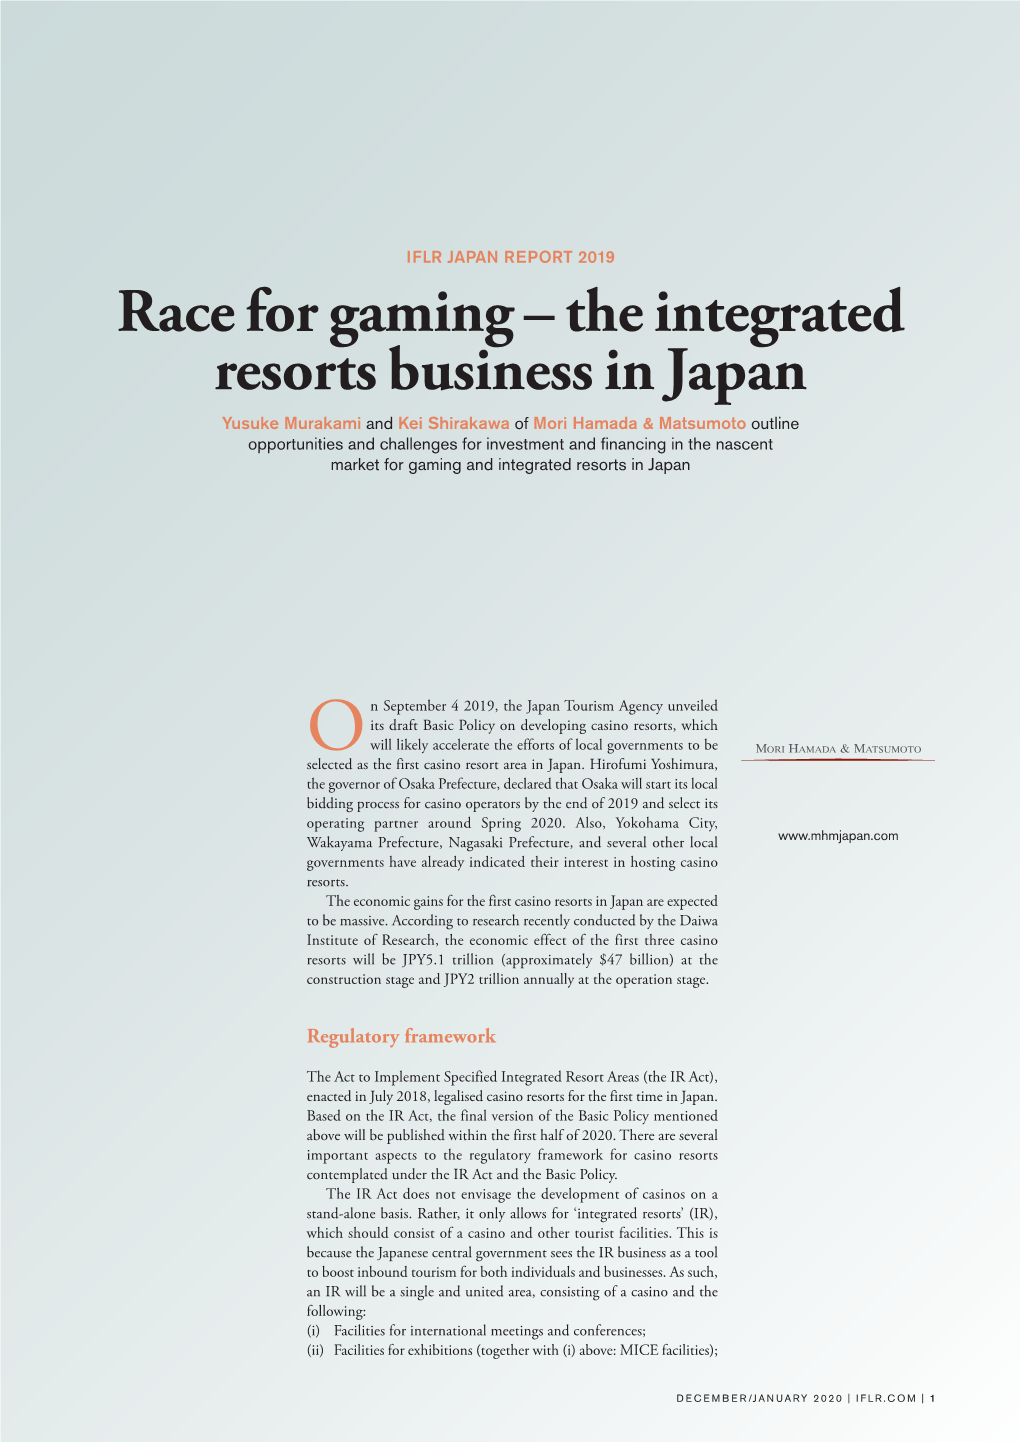 Race for Gaming – the Integrated Resorts Business in Japan